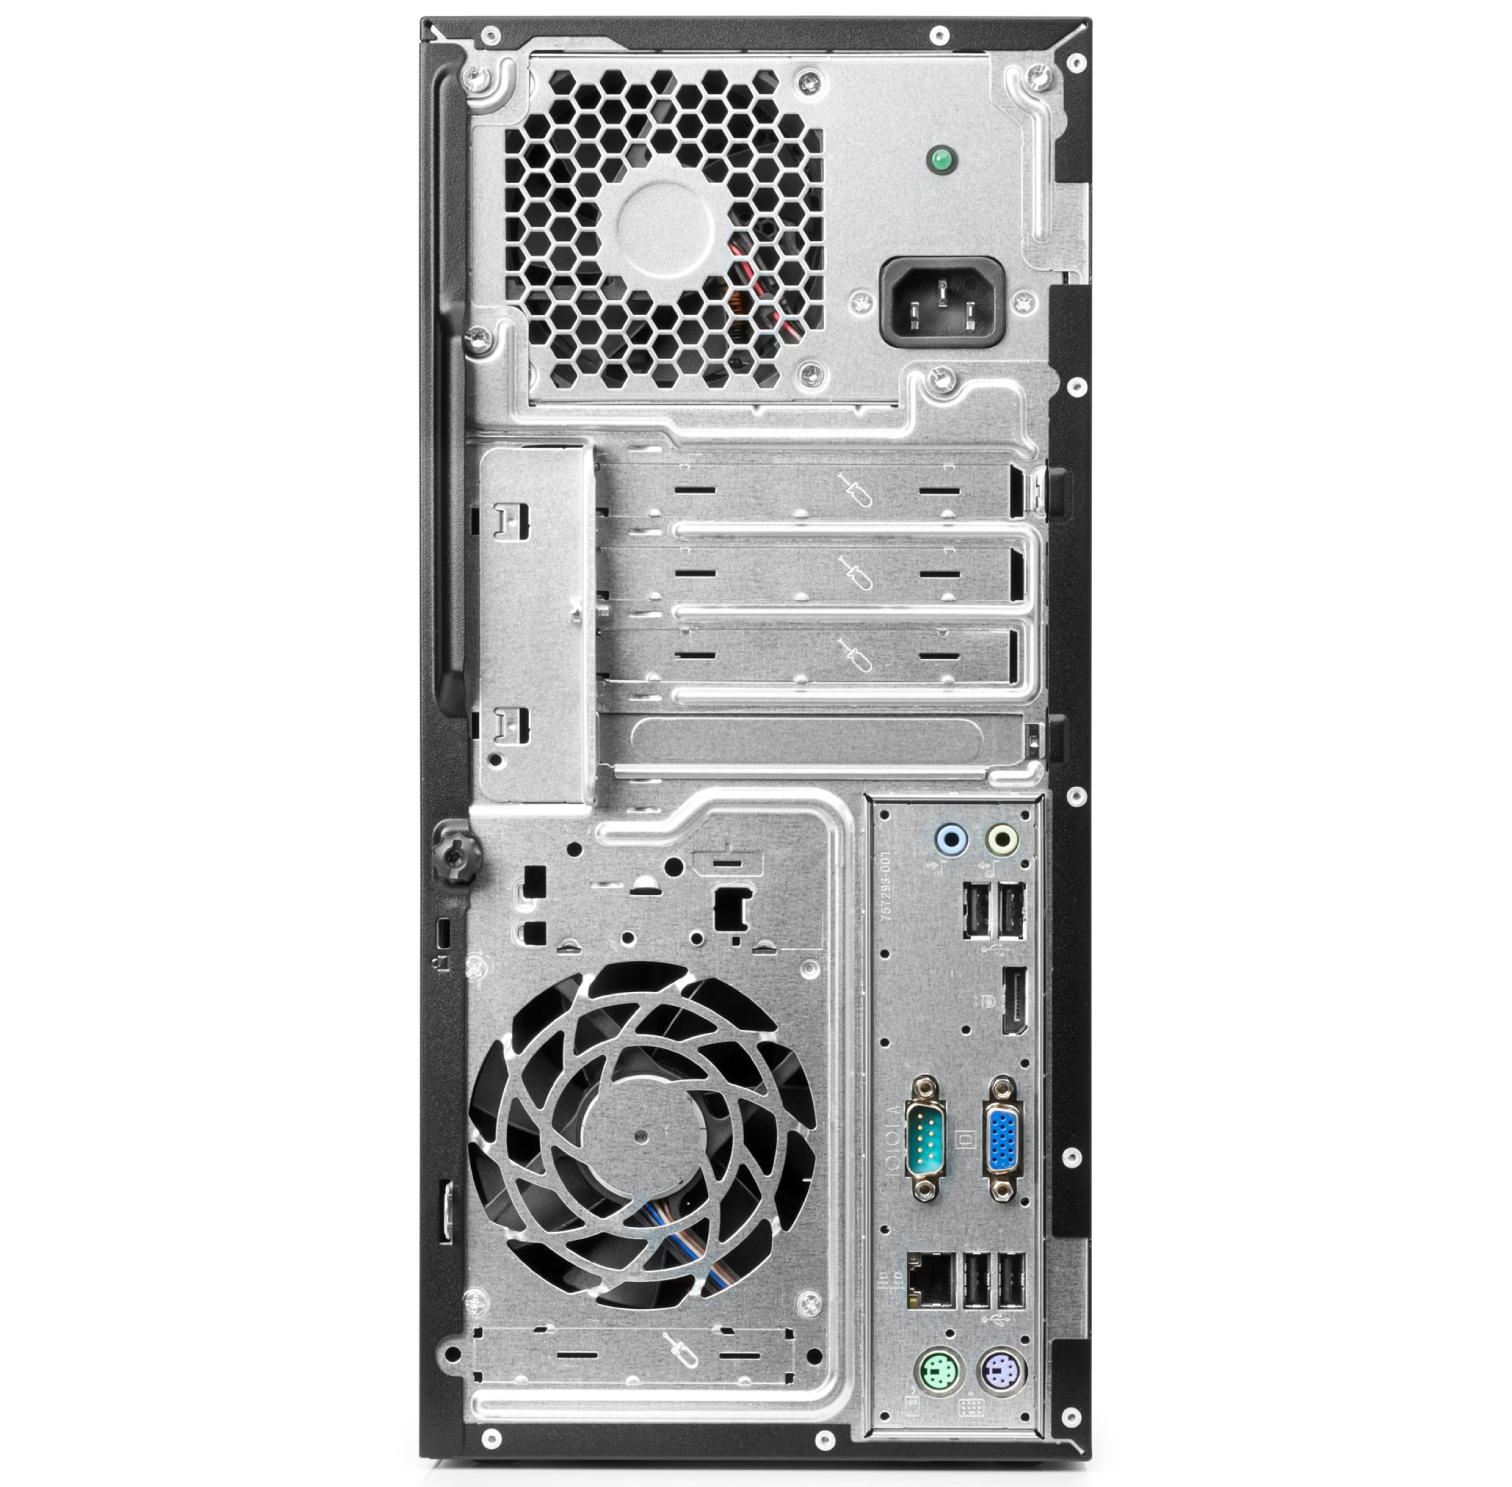 ProDesk 400 G2 Microtower PC